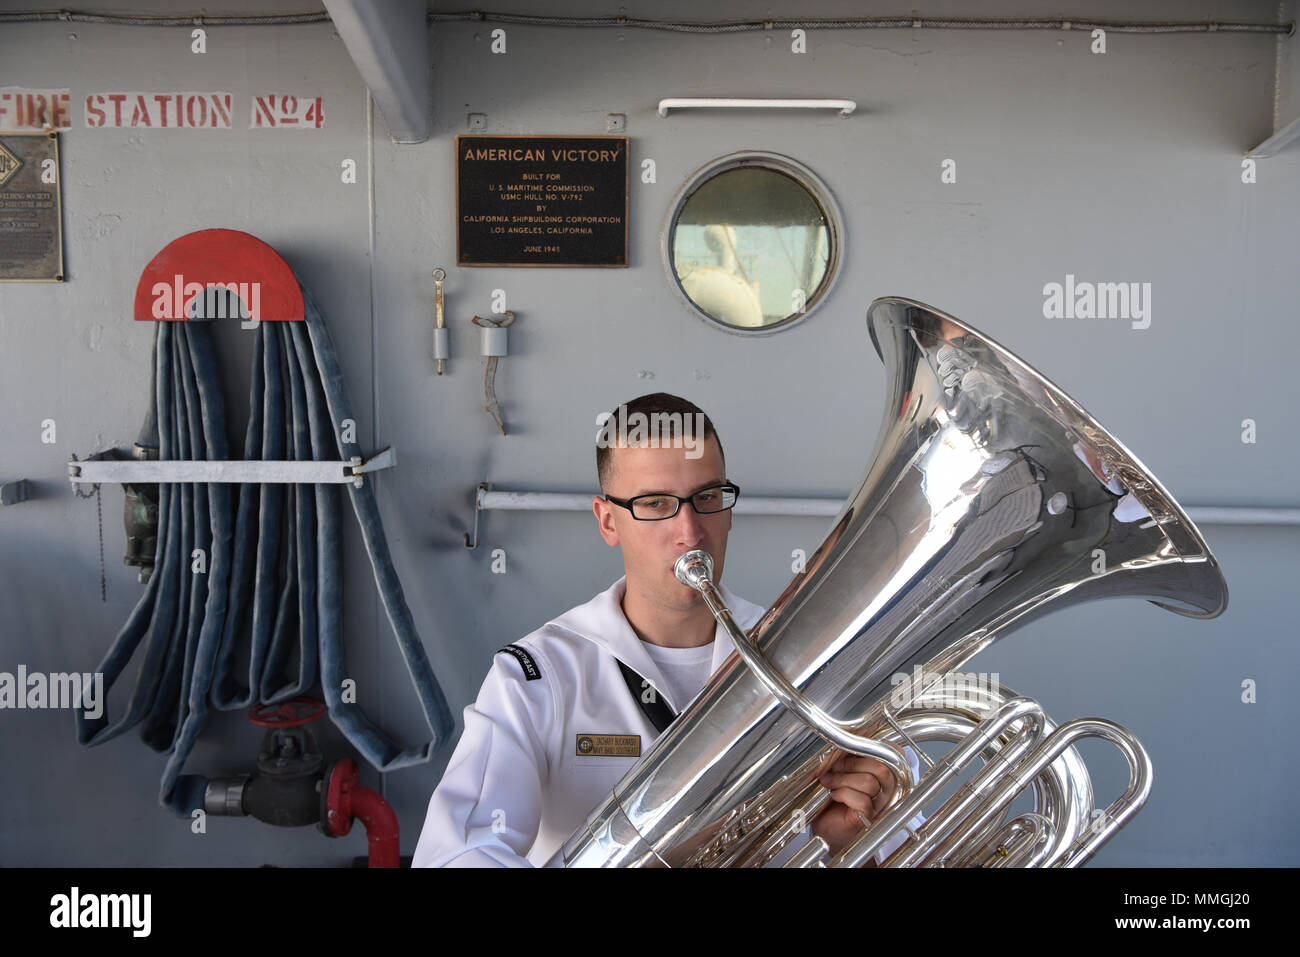 180507-N-IG616-3860 TAMPA, Florida (May 7, 2018)  Musician 3rd Class Zachary Buckwash, from Dillsburg, Pennsylvania performs on tuba with the Navy Band Southeast 'Windward Brass Quintet' for the Navy Week Tampa Opening Ceremony aboard the SS American Victory Mariners Museum.  Navy Weeks are designed to connect the public with Navy Sailors, programs and equipment throughout the country.  (U.S. Navy/Released) Stock Photo